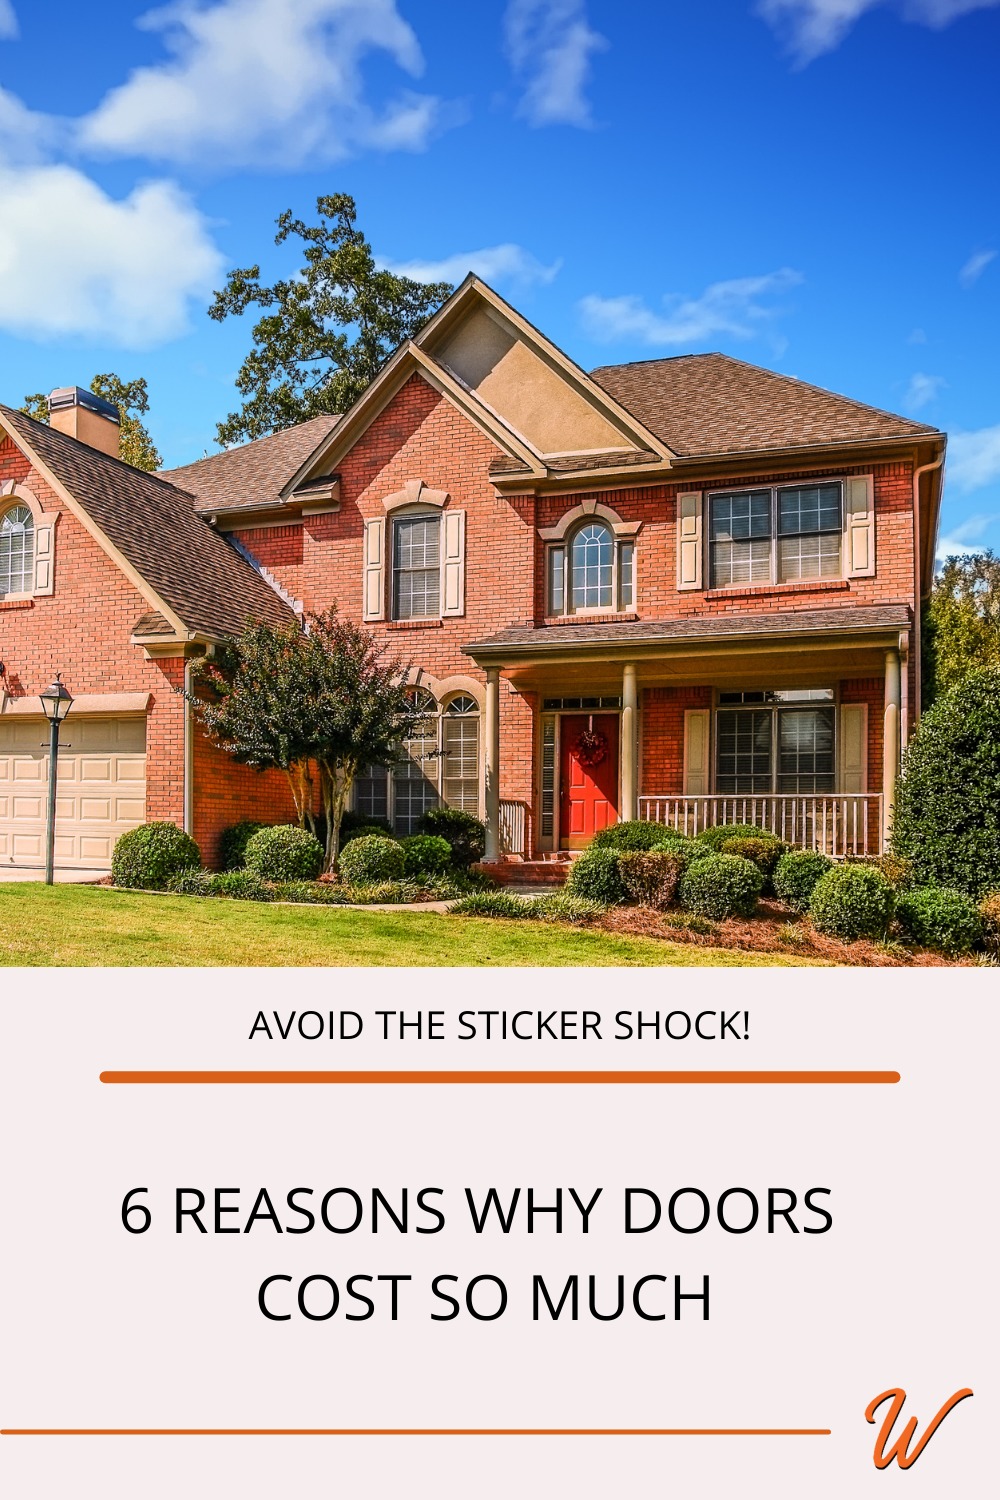 traditional brick home with a red front door and wood shutters captioned with "Avoid the sticker shock: 6 reasons why doors cost so much"